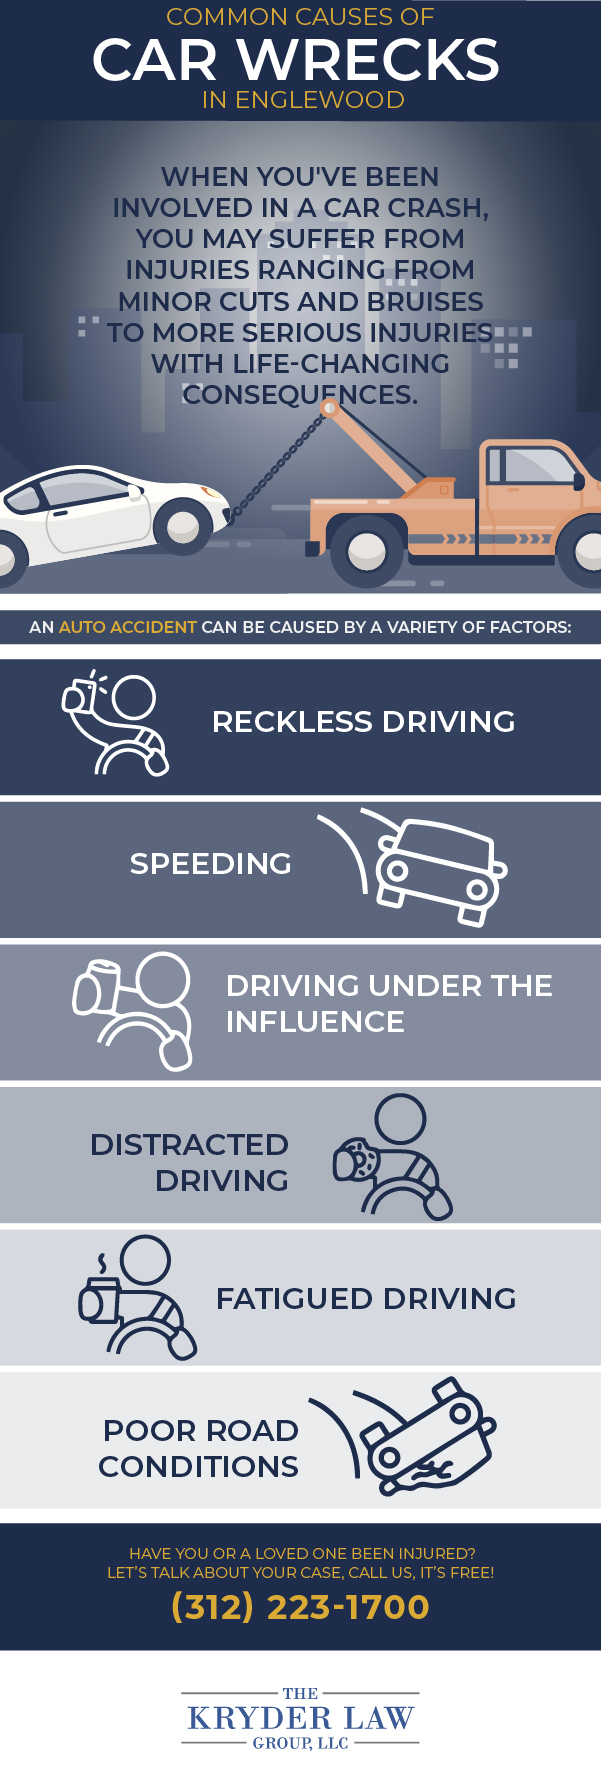 Englewood Car Accident Lawyer Infographic